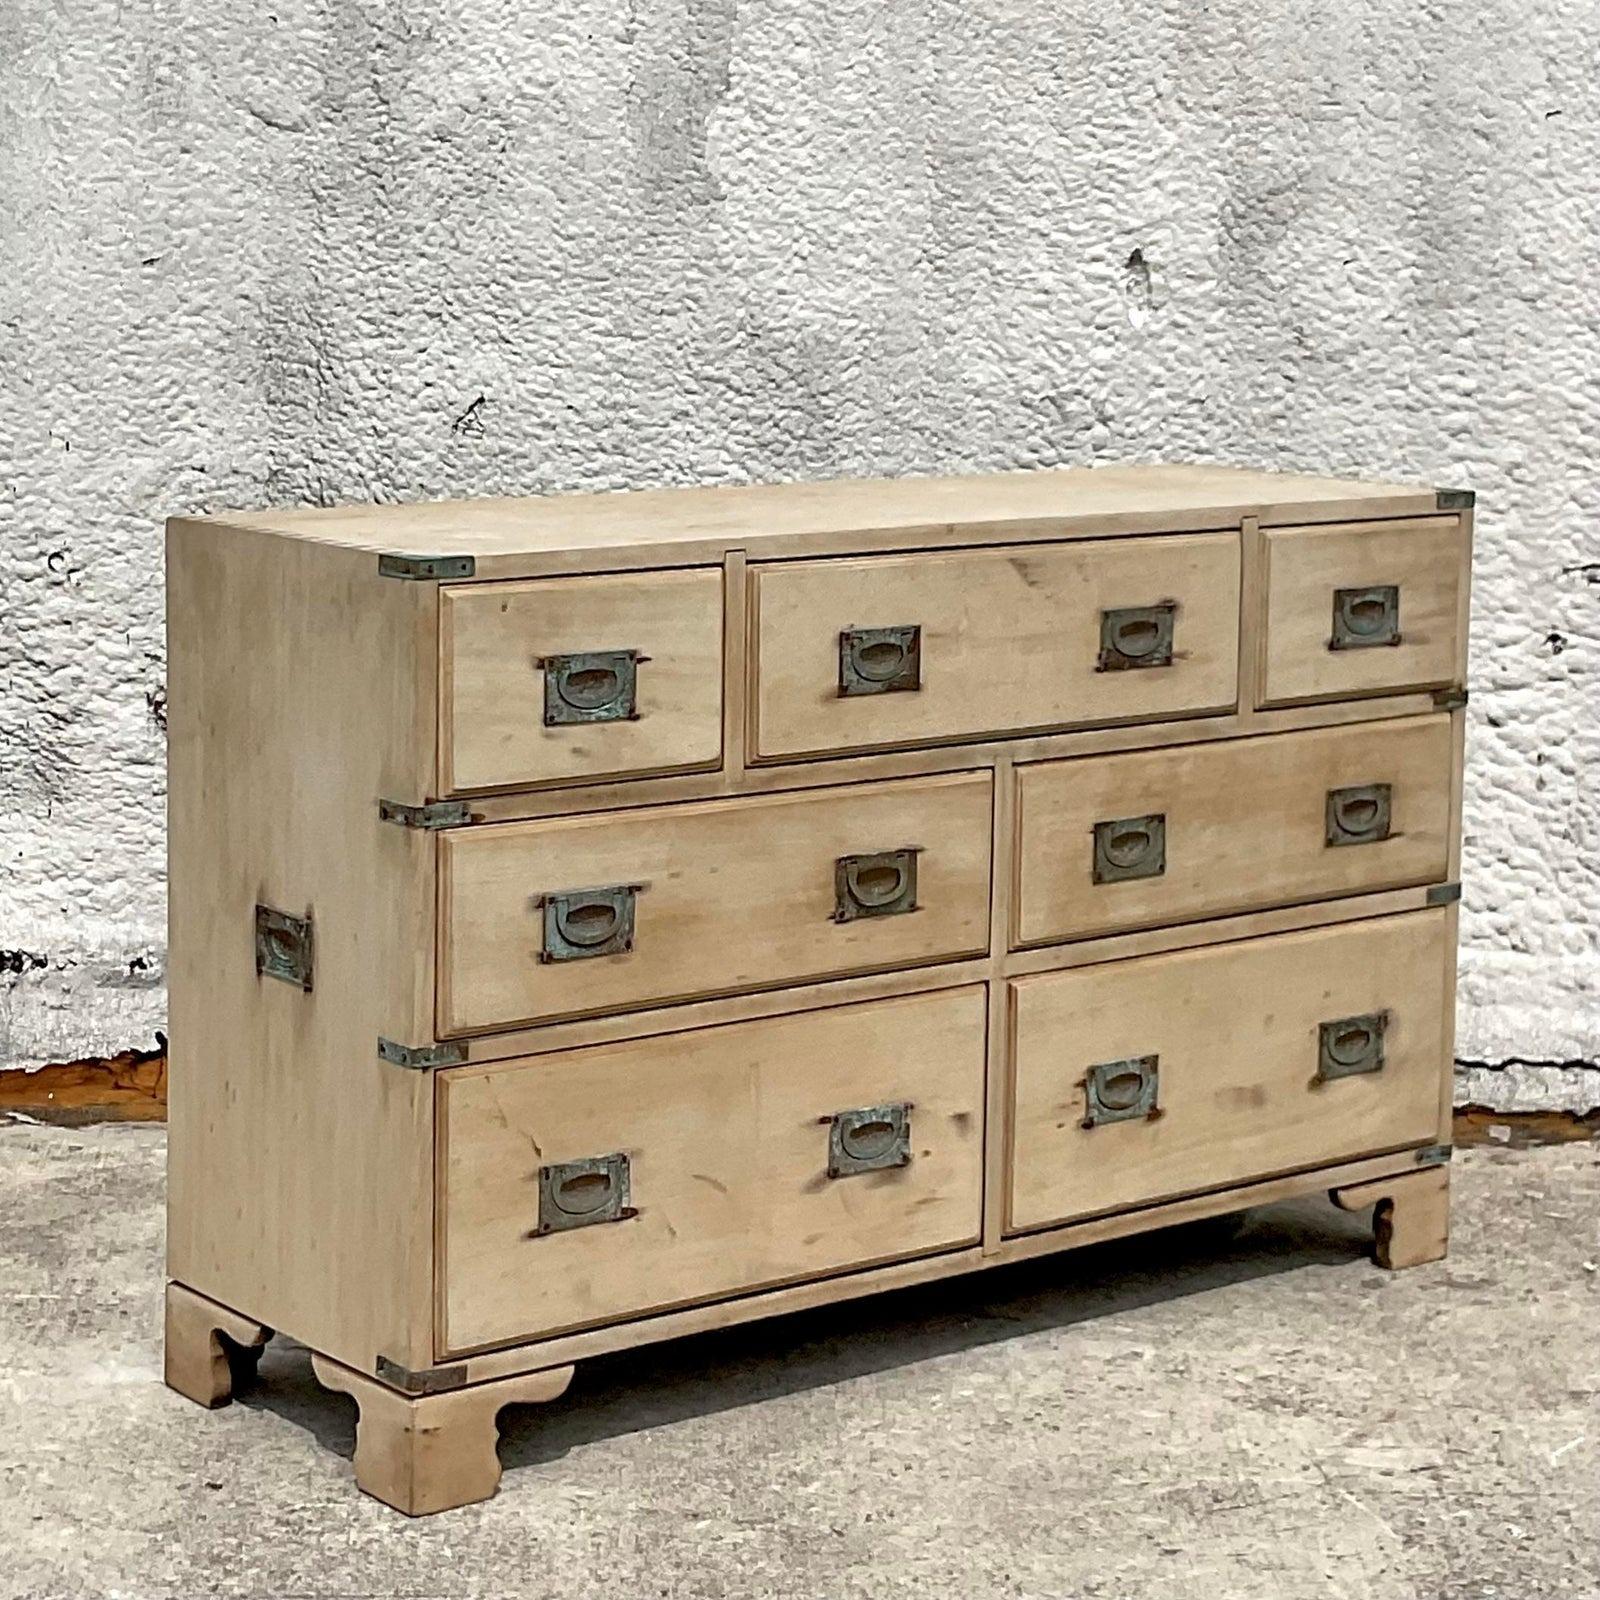 Enhance your décor with the timeless elegance of this Vintage Regency Bleached Wood Campaign Dresser. Marrying American style with Regency sophistication, this piece features sleek lines and practical storage in a beautifully bleached wood finish.